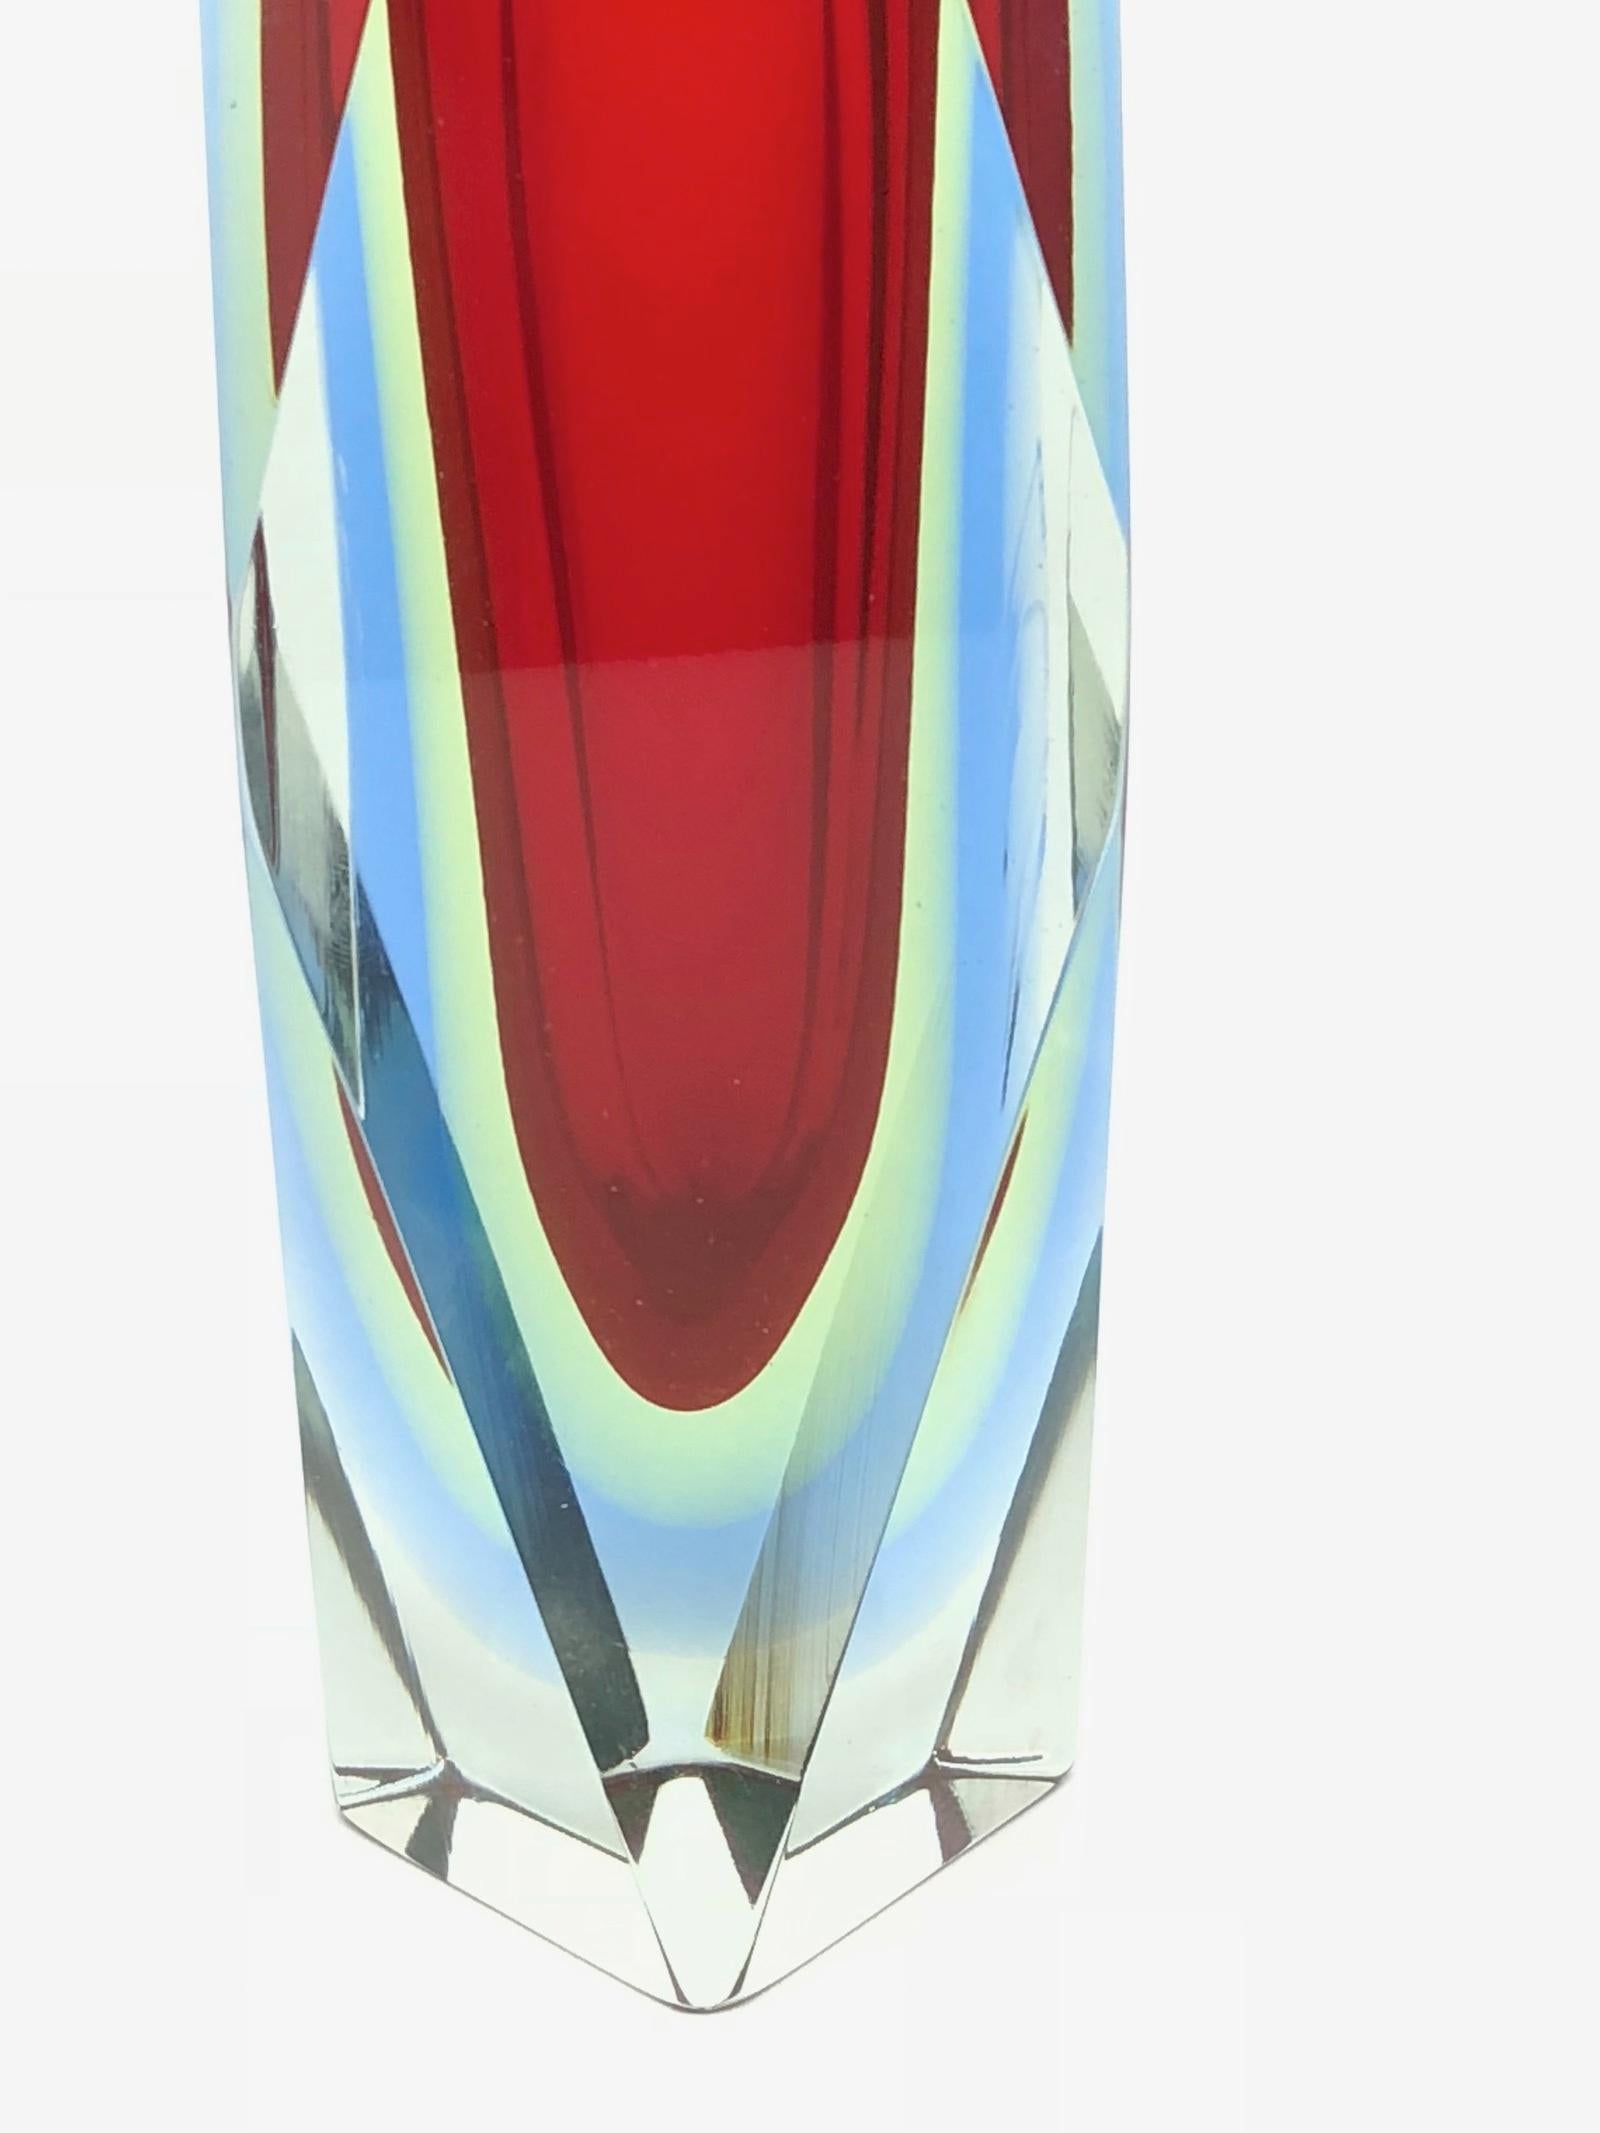 An amazing Venetian Murano glass Mid-Century Modern Mandruzzato vase made in Italy, circa 1960s. This is a heavy glass block vase. Red on the inside followed by a layer of green, blue within clear. The top of the vase is flat cut. Vase is in very